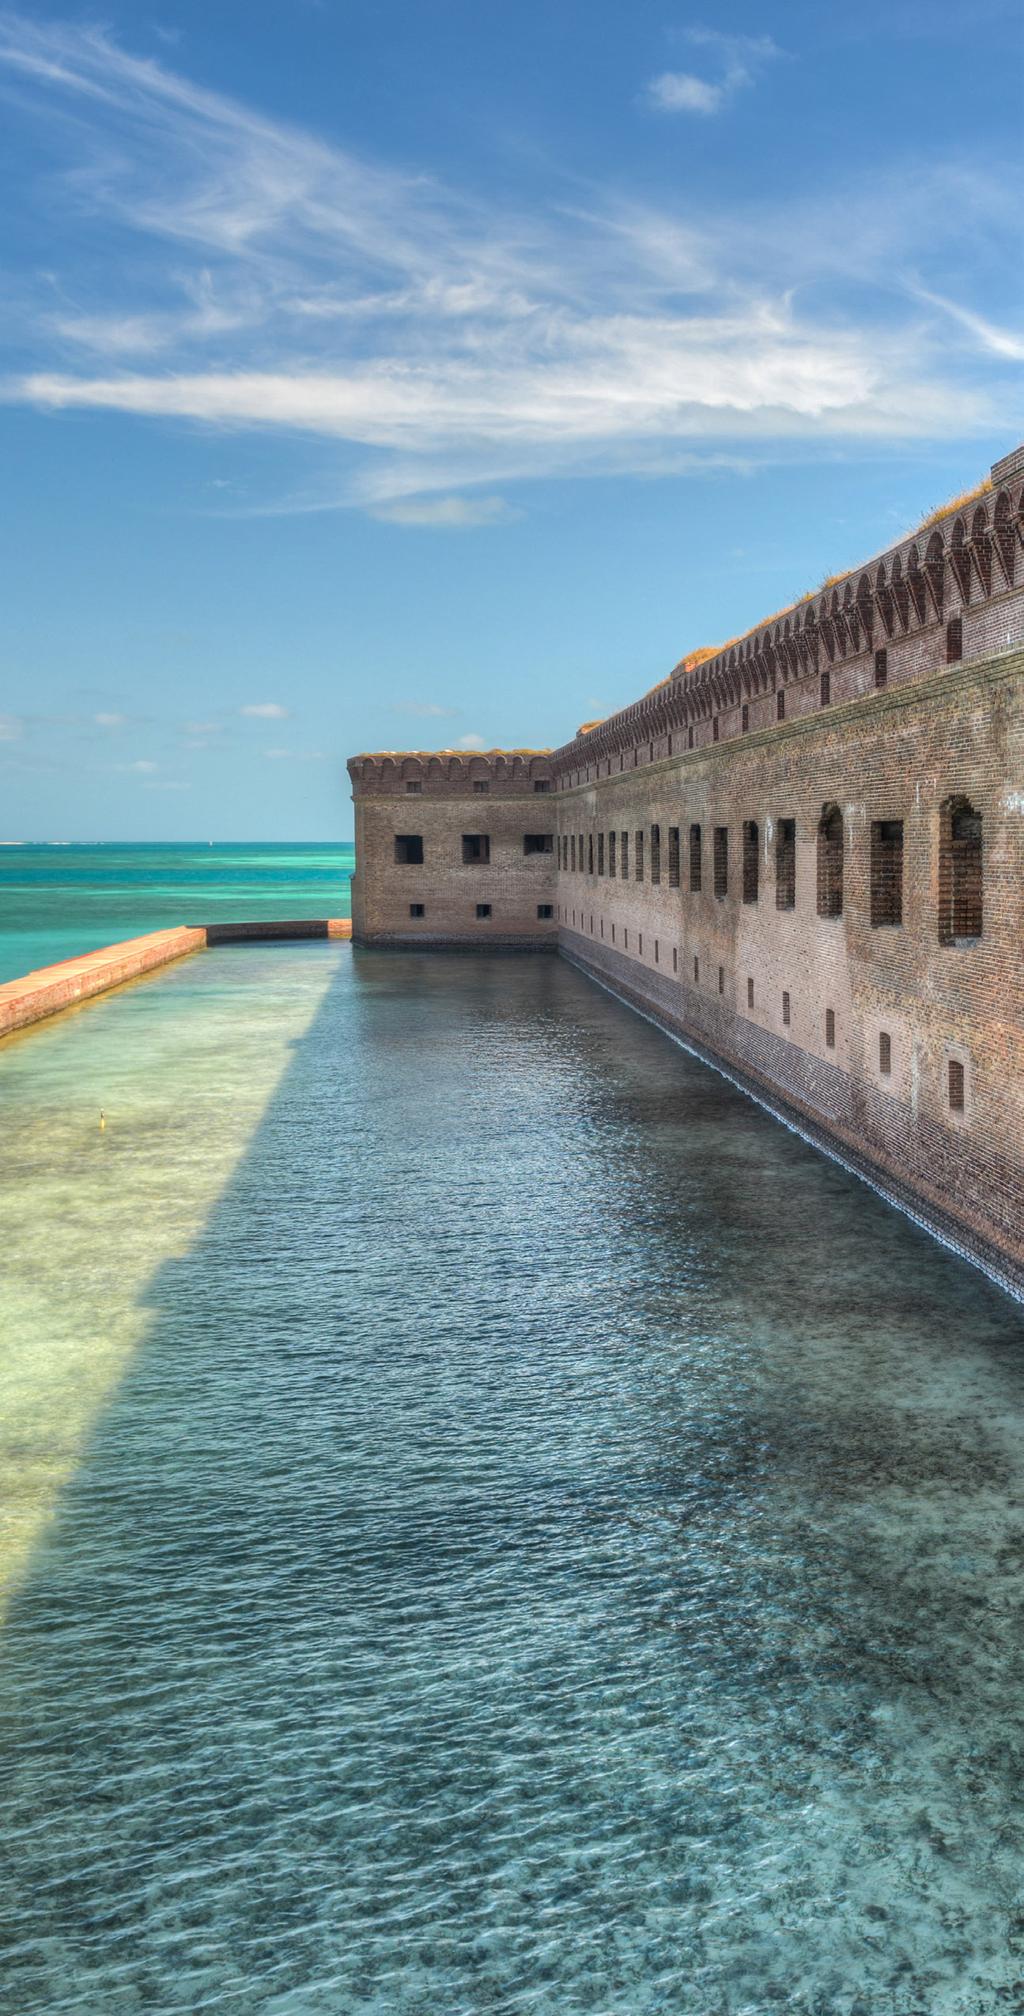 DAY 3: DRY TORTUGAS HISTORY WRAPPED IN NATURAL SPLENDOR Enjoy a light breakfast on the aft deck while your yacht embarks on the 70-mile cruise to the Dry Tortugas today.